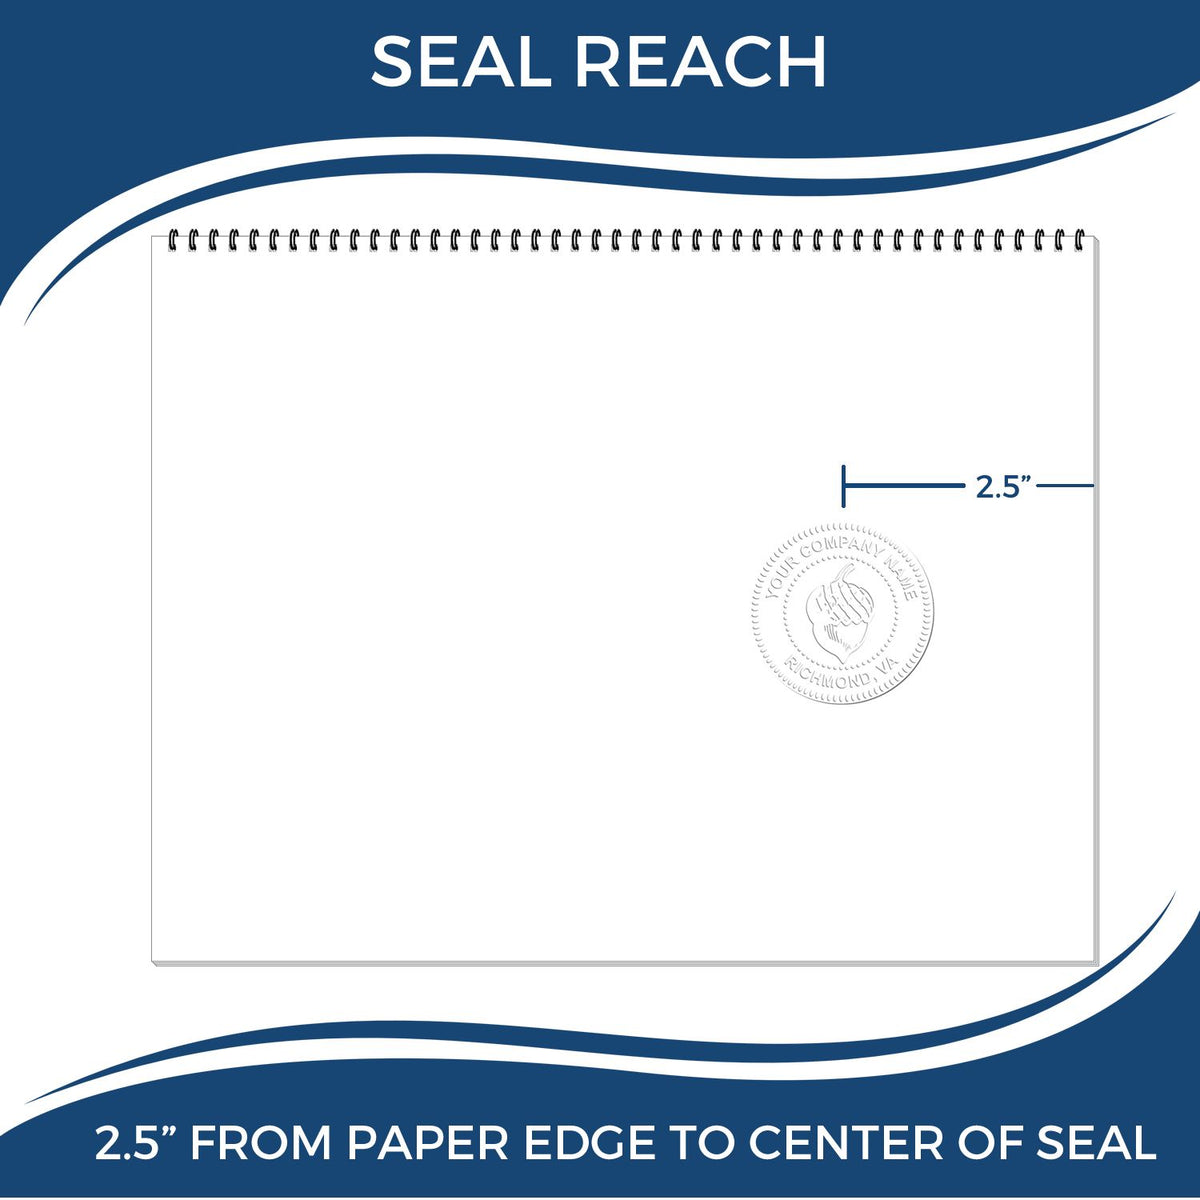 An infographic showing the seal reach which is represented by a ruler and a miniature seal image of the State of Nebraska Long Reach Architectural Embossing Seal